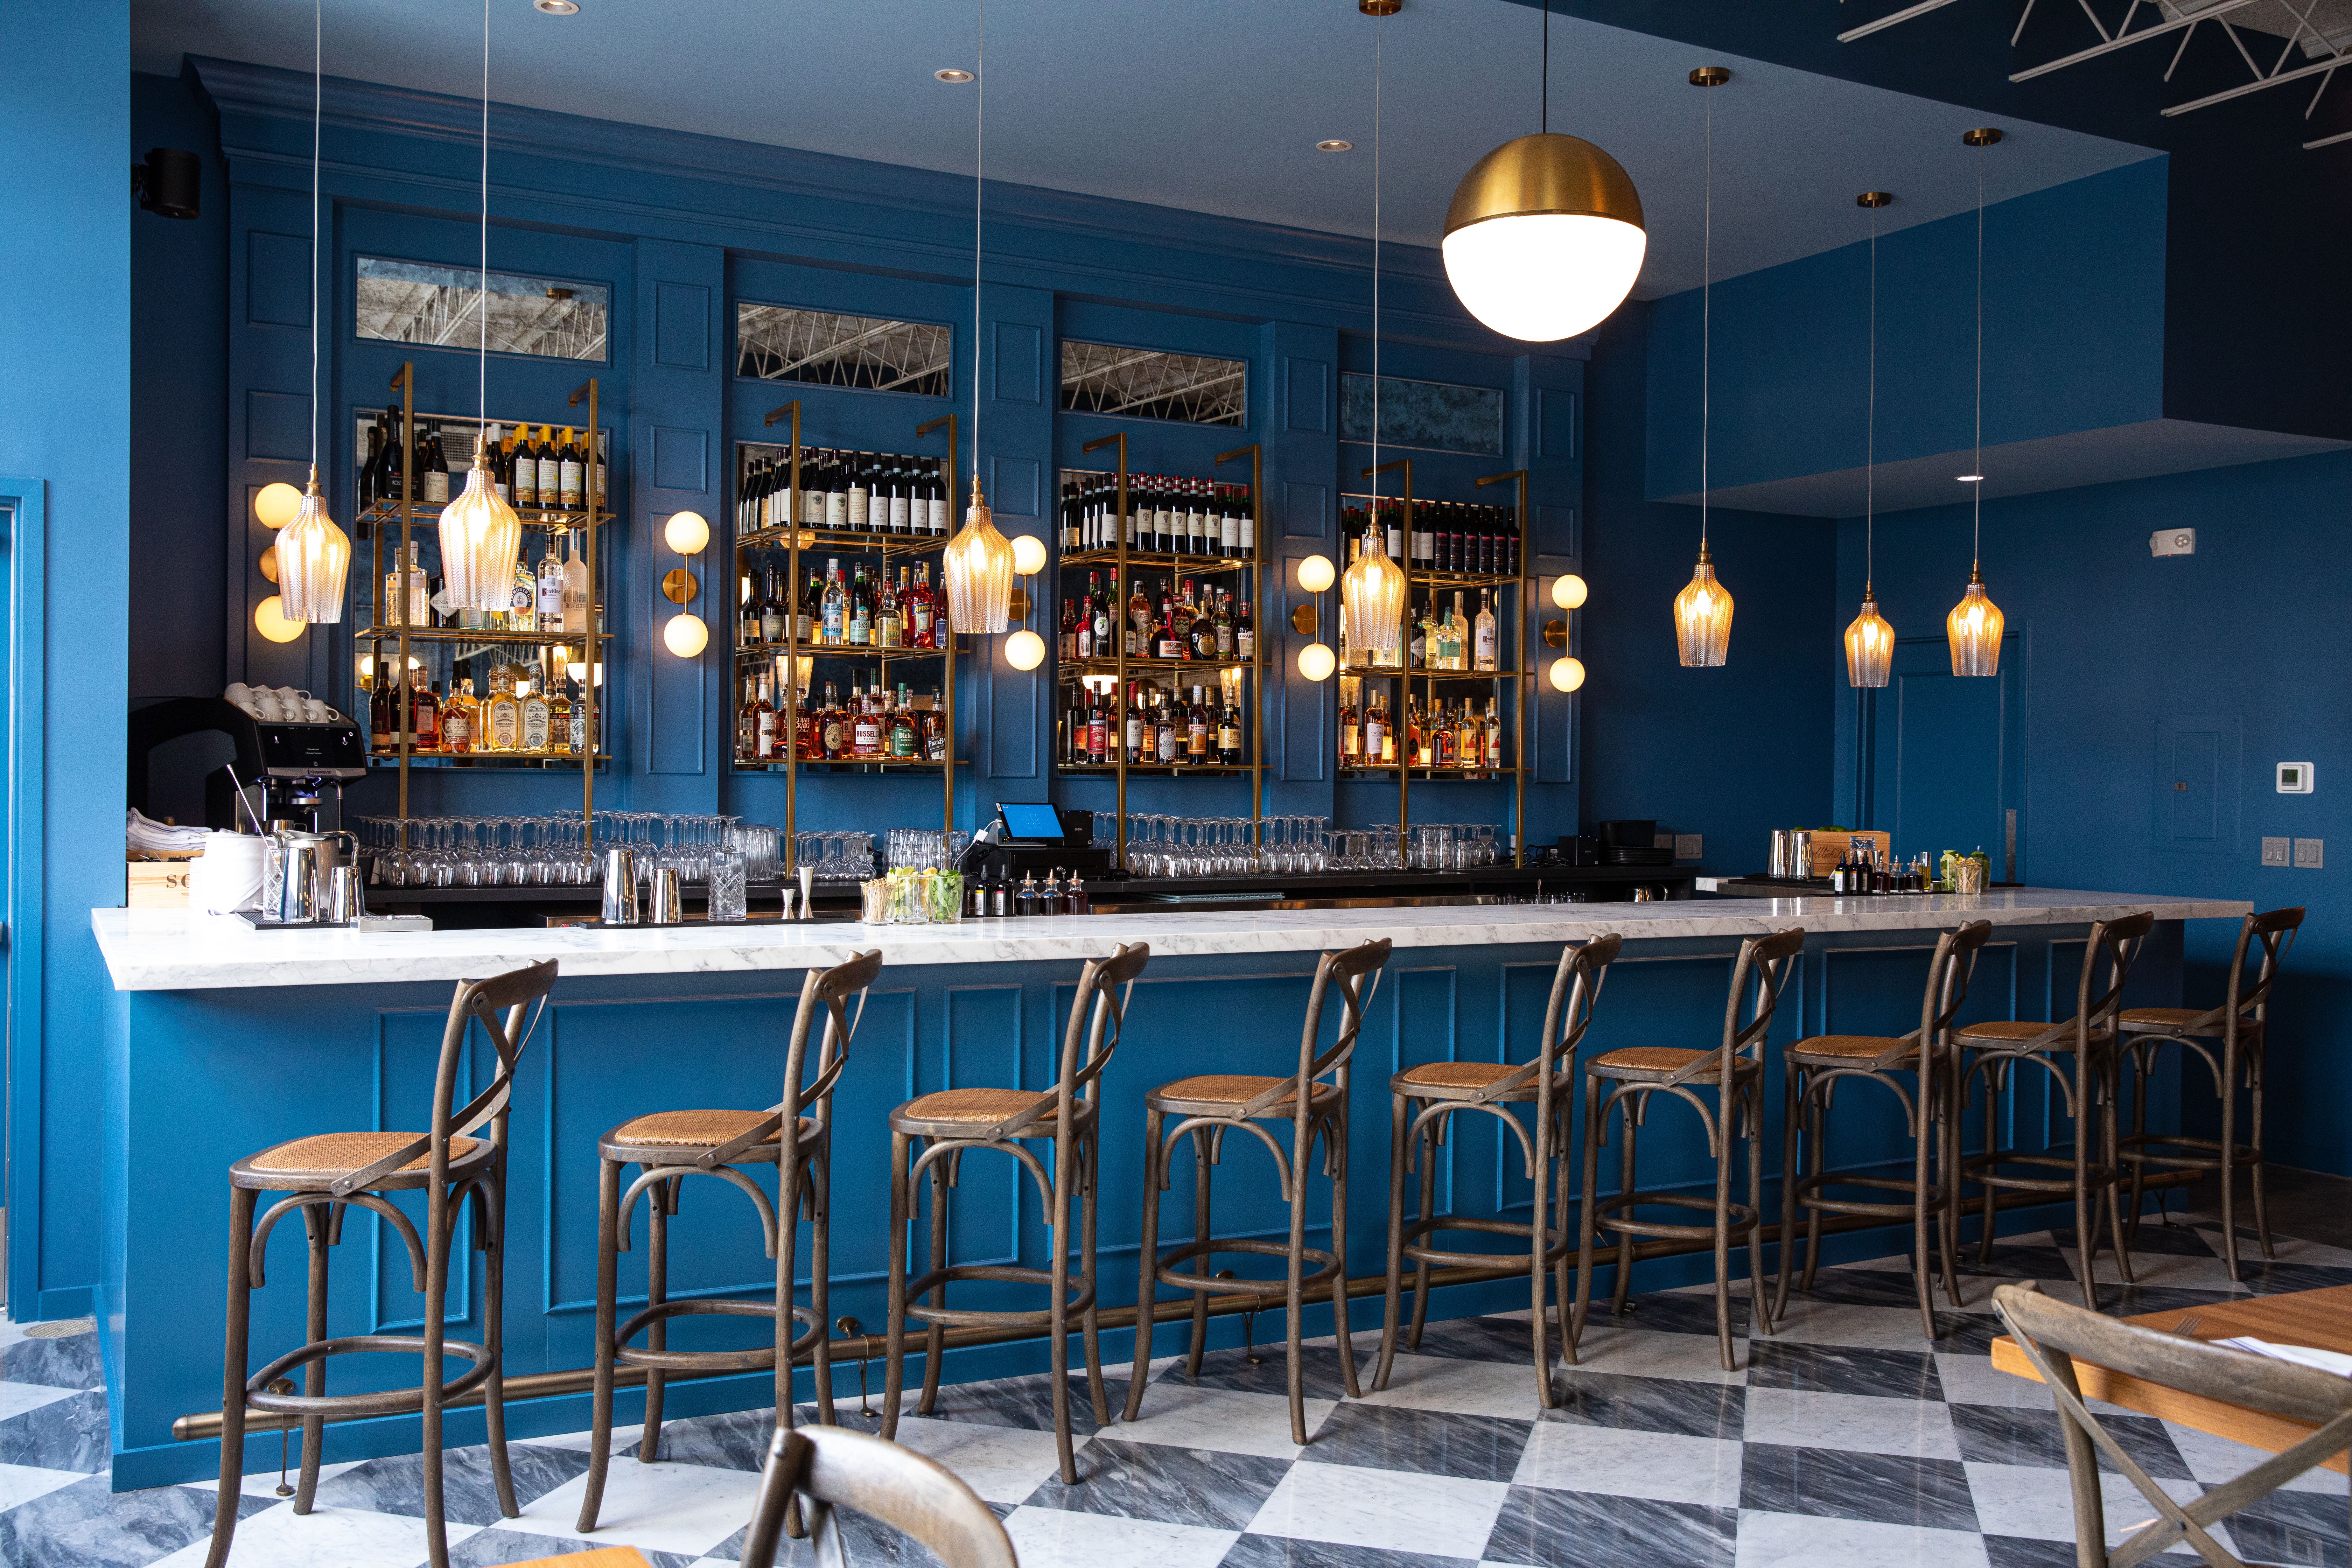 A view of the bar inside Osteria Lupo. The walls and bar back are a deep blue, and bronze pendant lights hang from the ceiling. Tall bar chairs await customers.